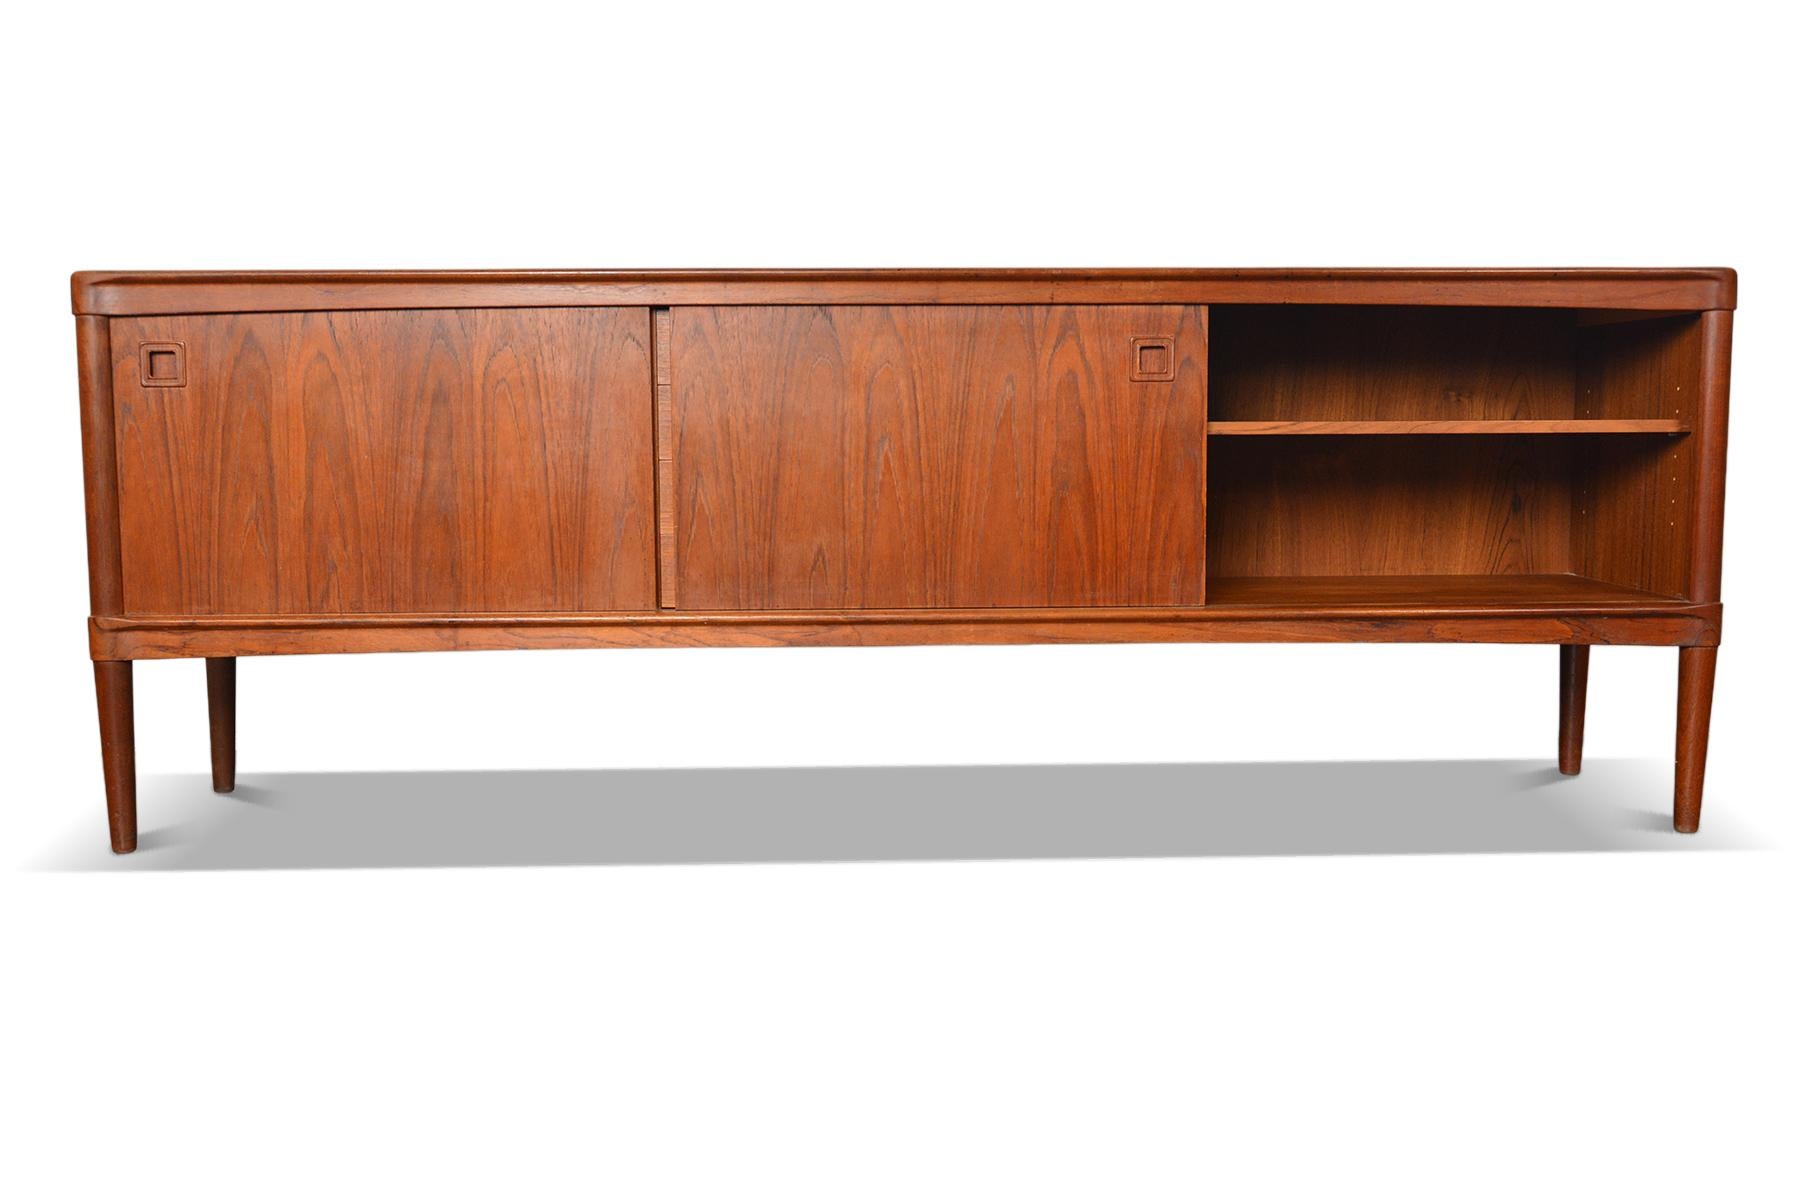 Square Pull Teak Credenza by h.w. Klein #1 For Sale 1